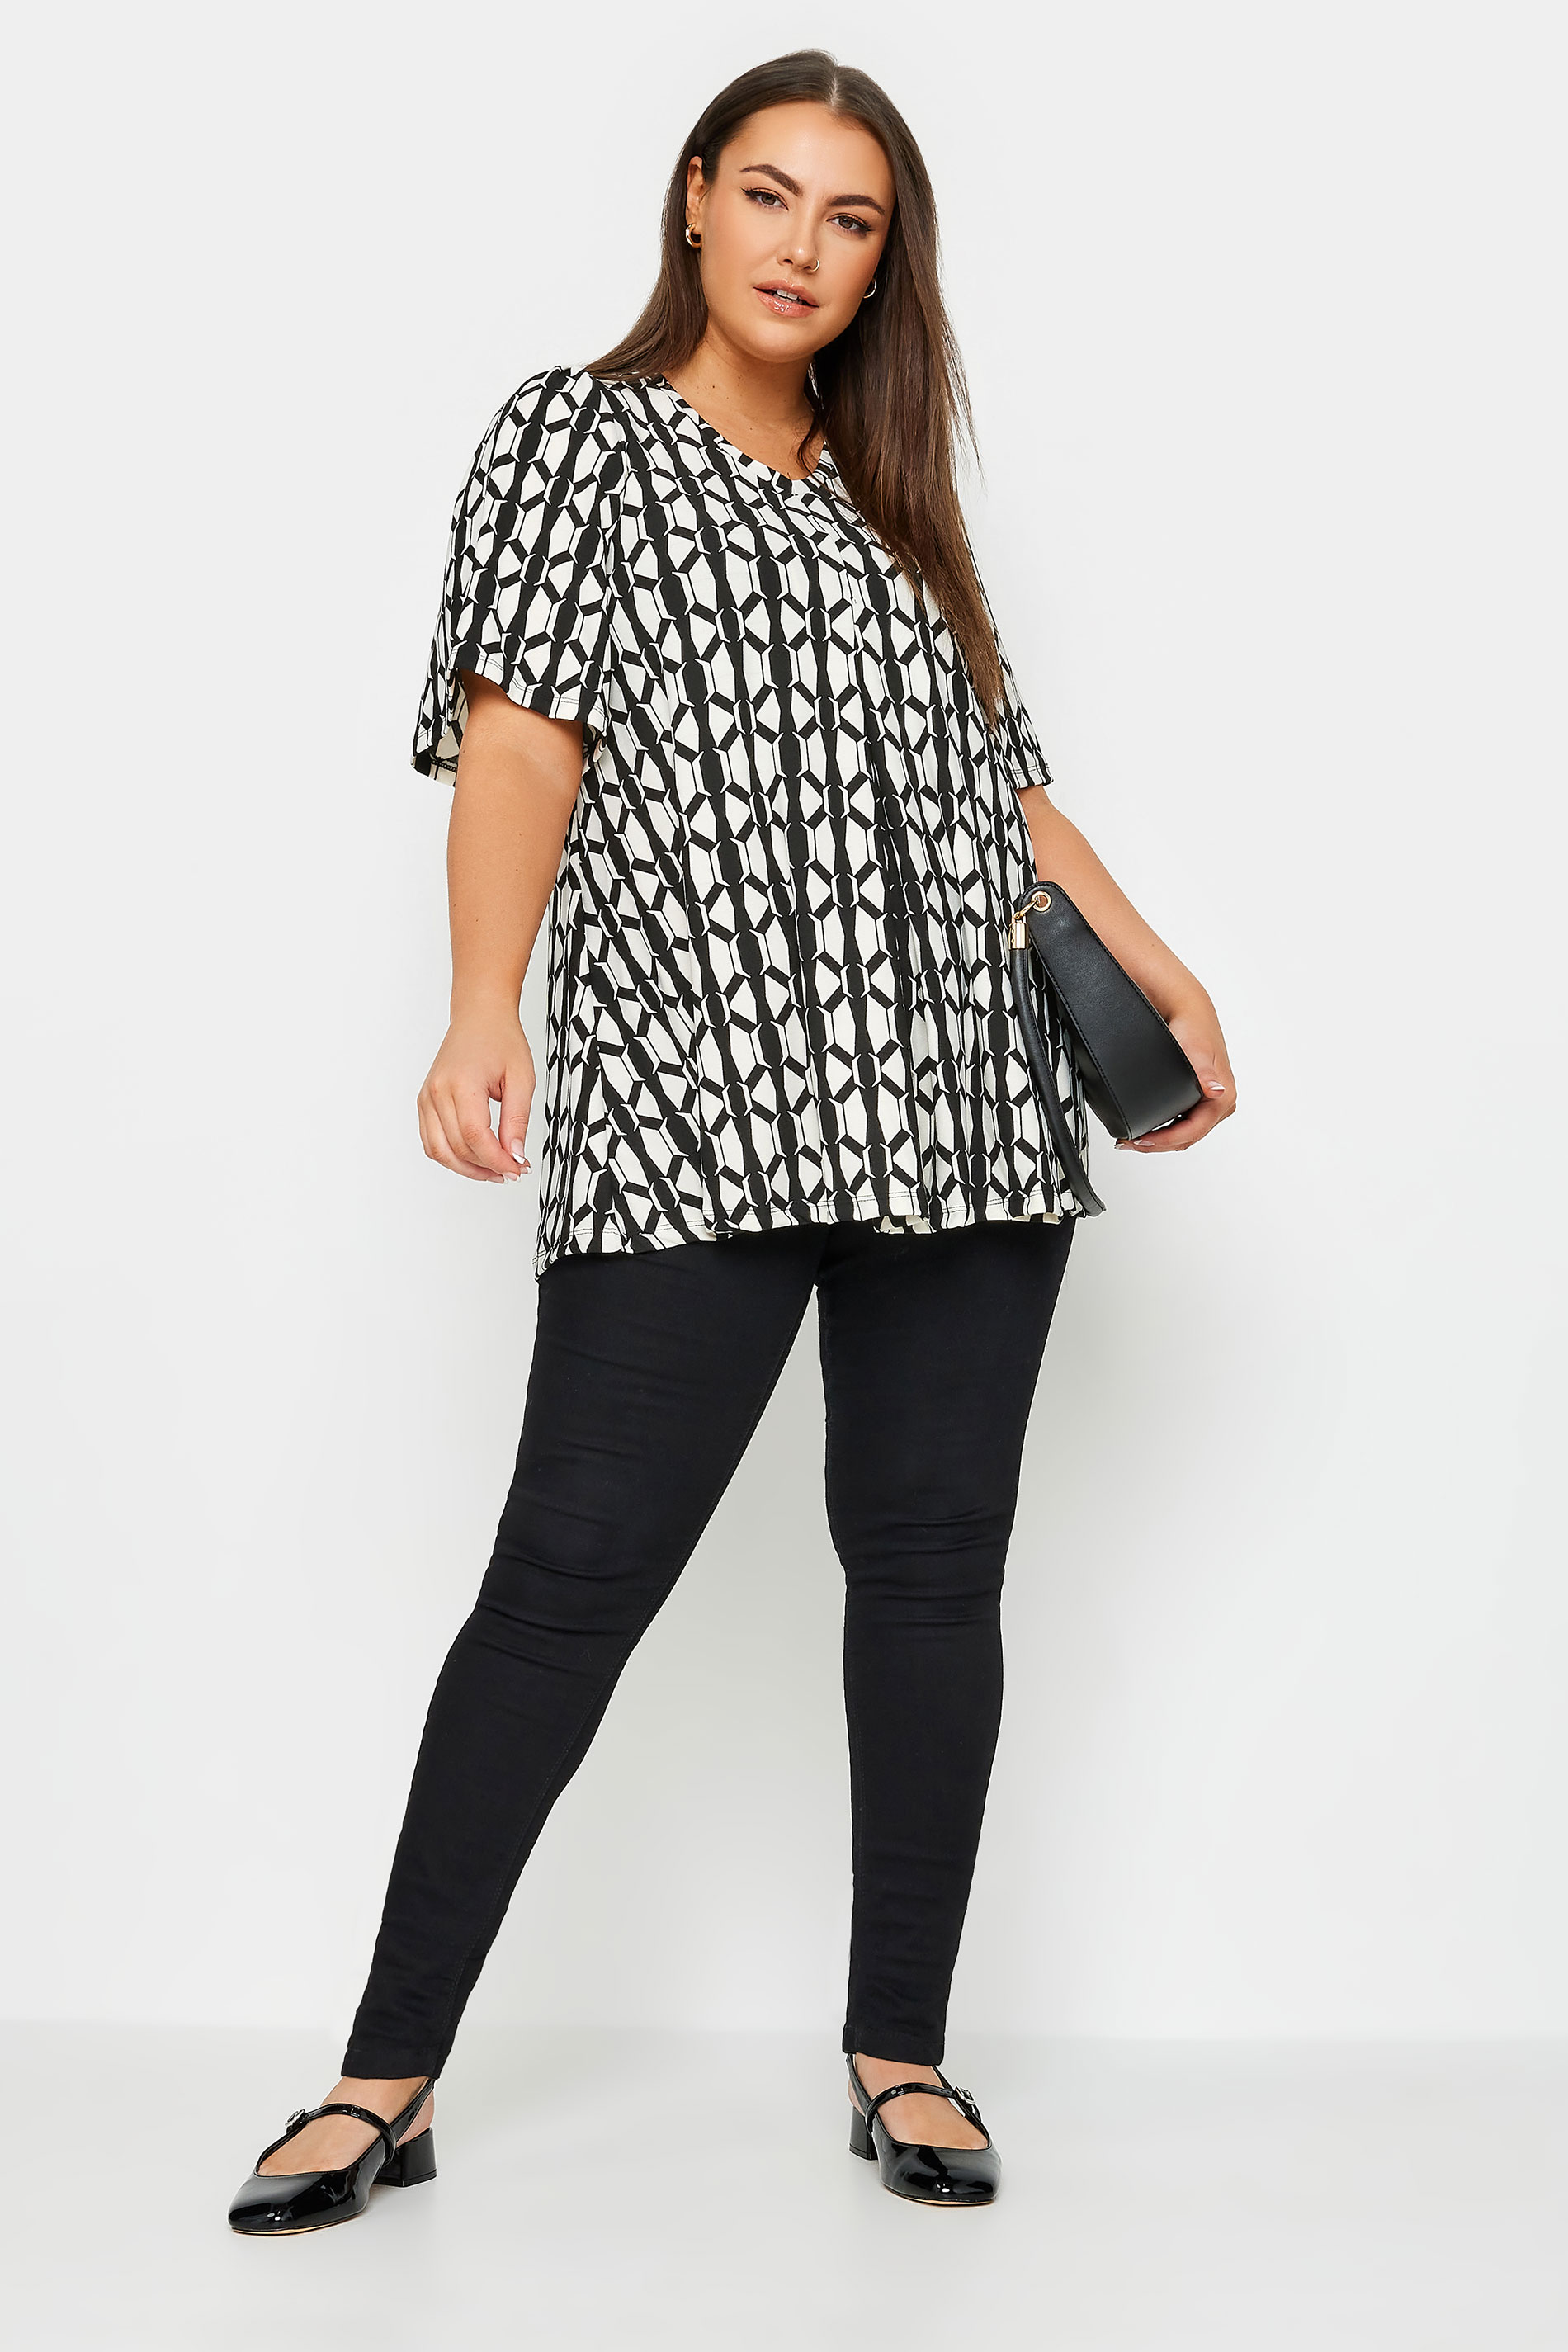 YOURS Plus Size Black Geometric Print Pleat Front Top | Yours Clothing 2